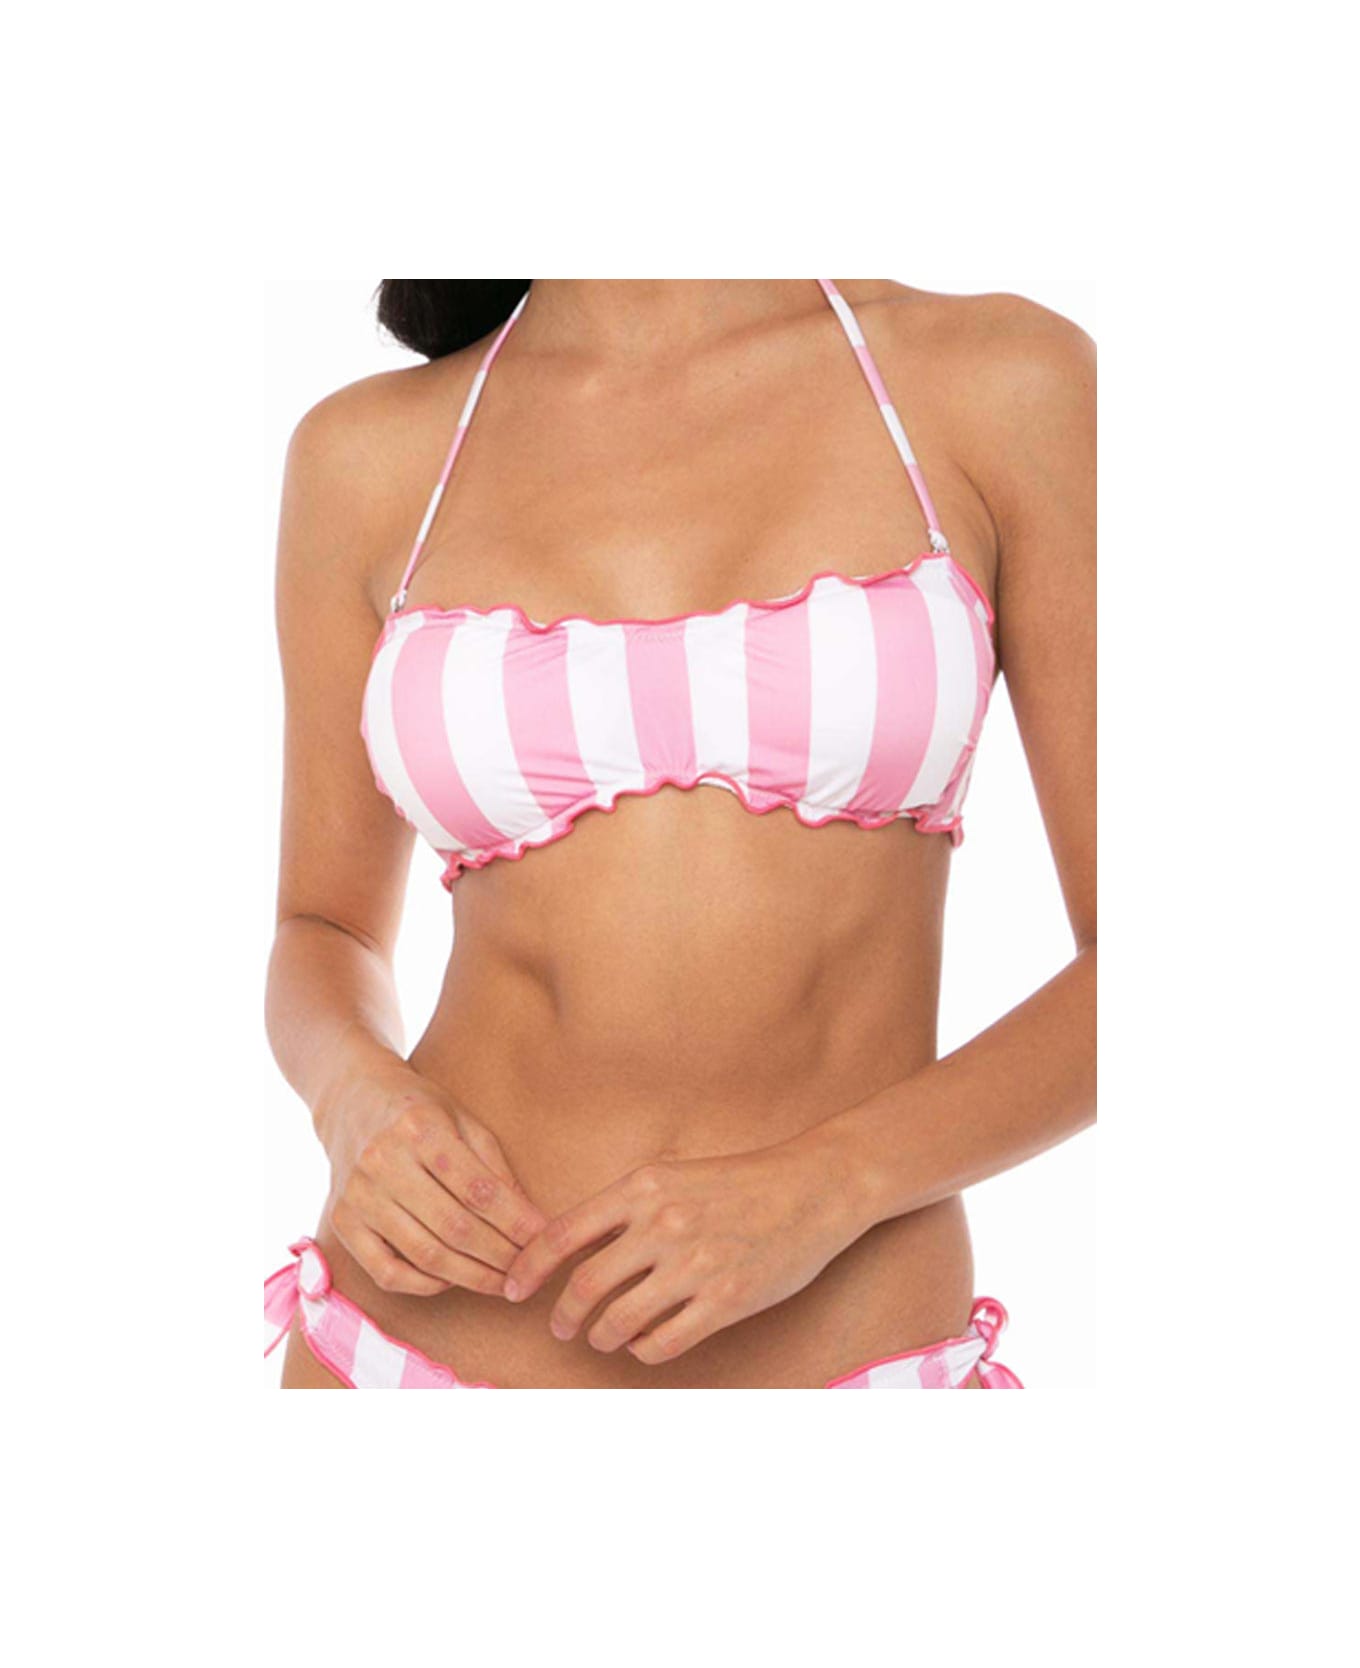 MC2 Saint Barth Woman Bandeau Top Swimsuit With Stripes - PINK